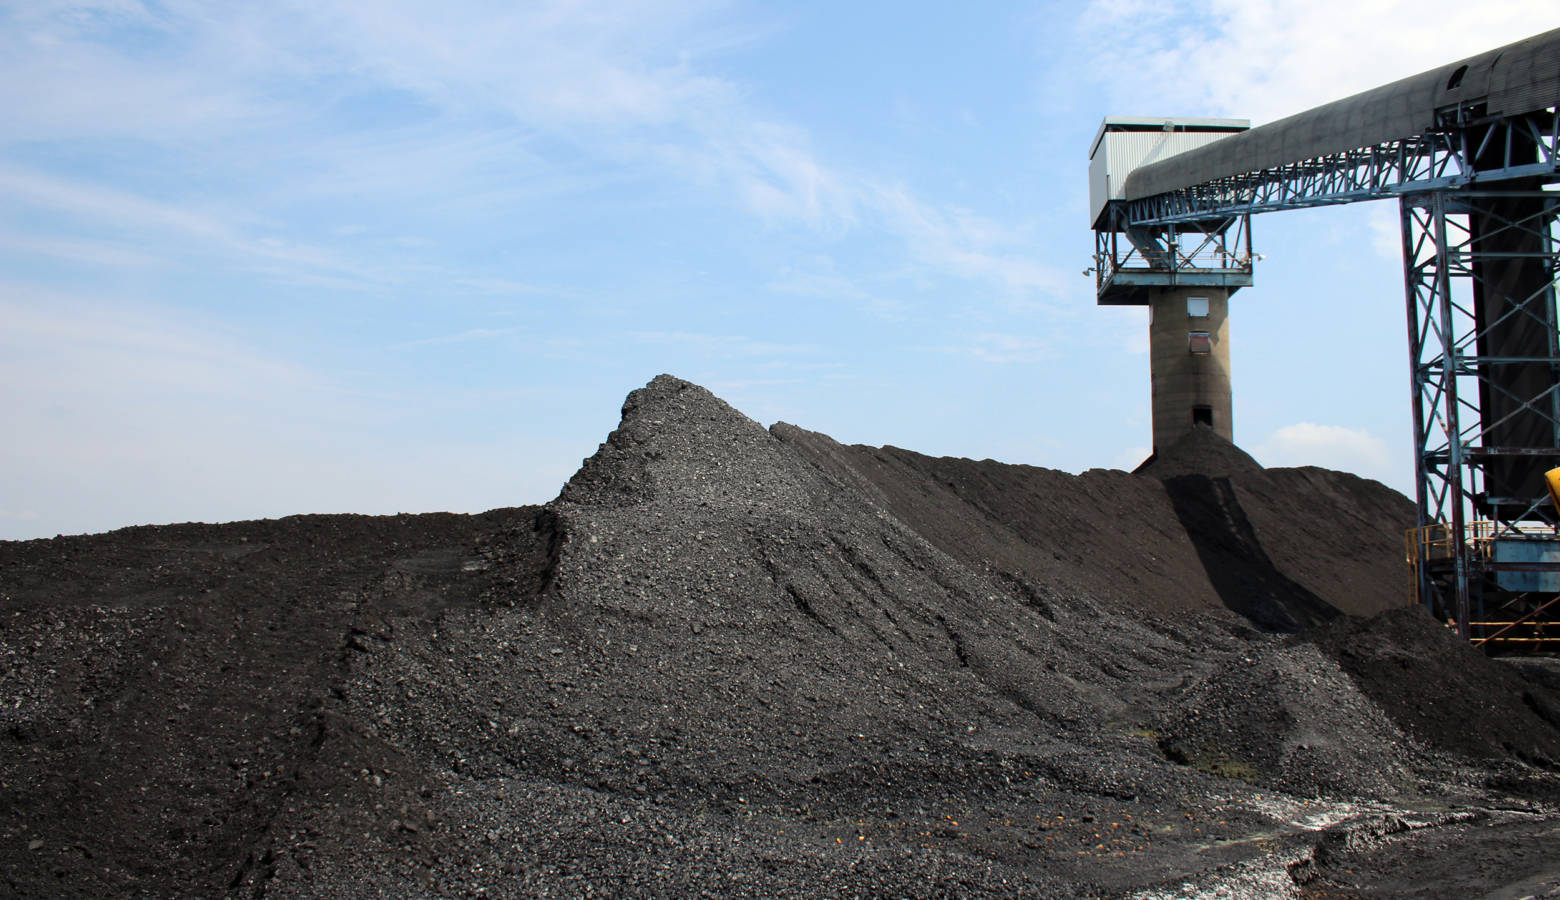 Illinois Basin coal piles up around Alliance Coal's conveyor belt at the Port of Mt. Vernon, waiting for transport on barges to regional power plants. (FILE PHOTO: Annie Ropeik/IPB News)